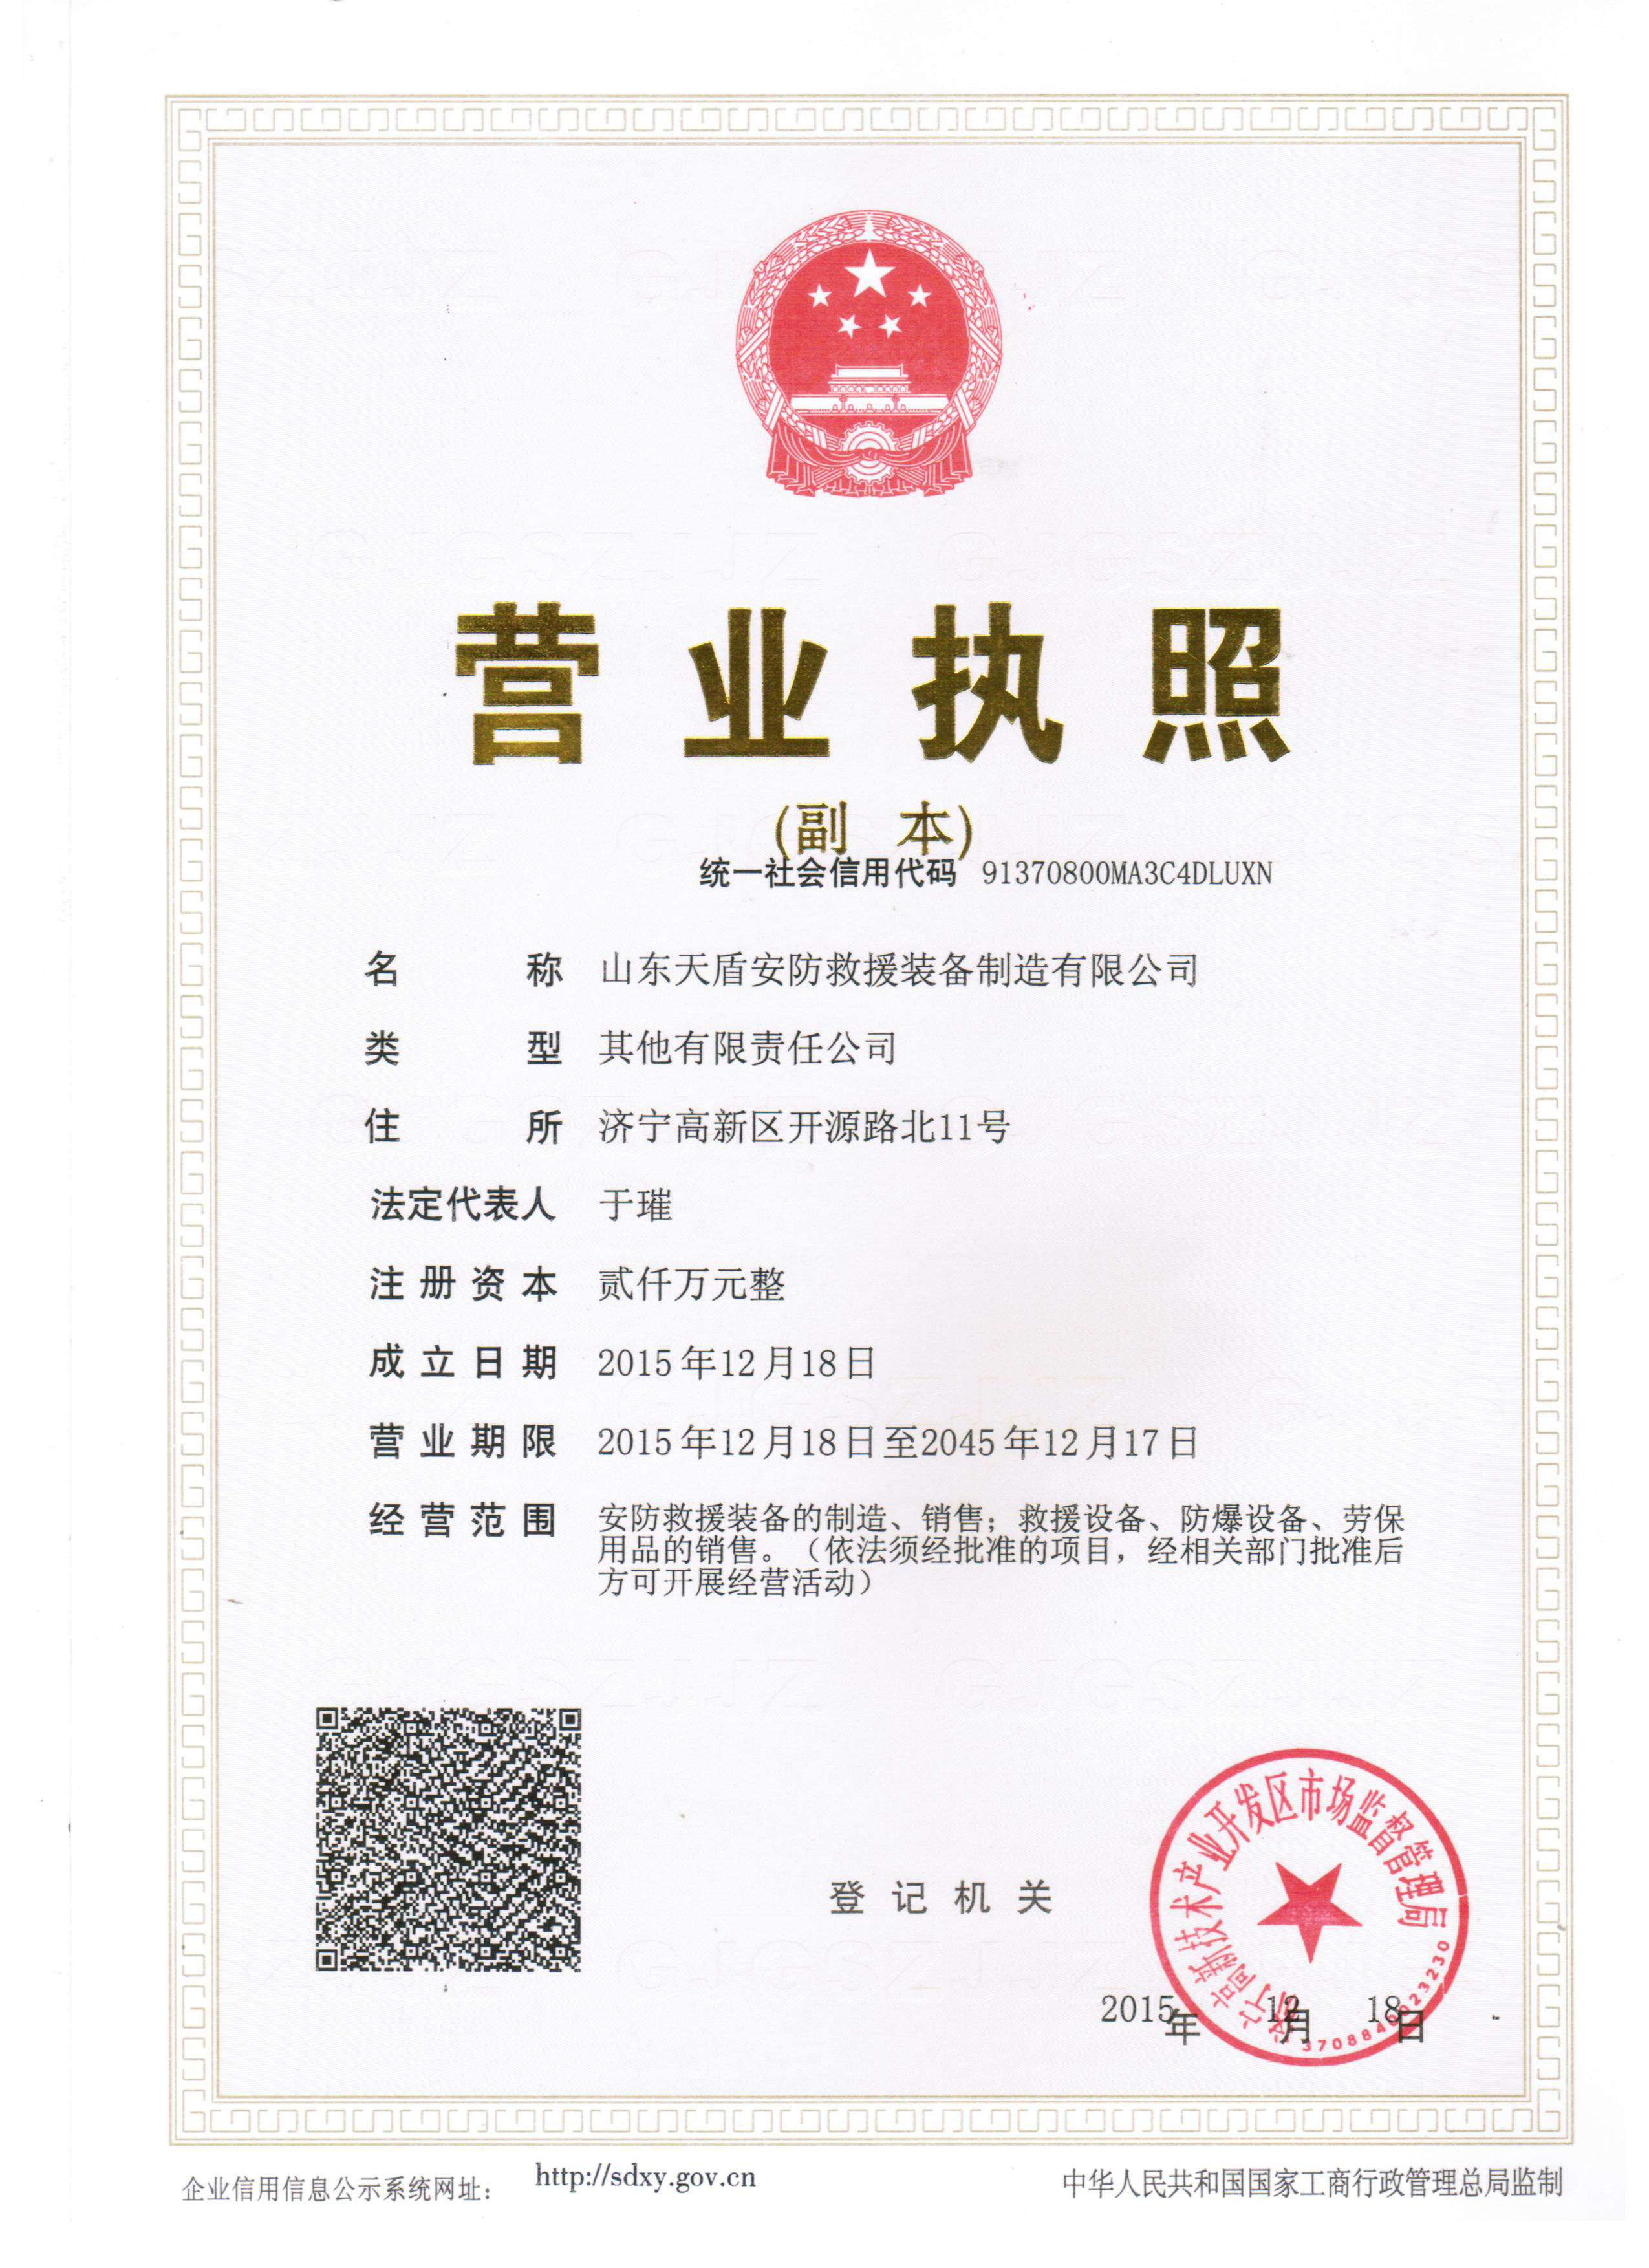 Successfully Registered Shandong TianDun Protection Rescue Equipment Manufacturing Co., Ltd.